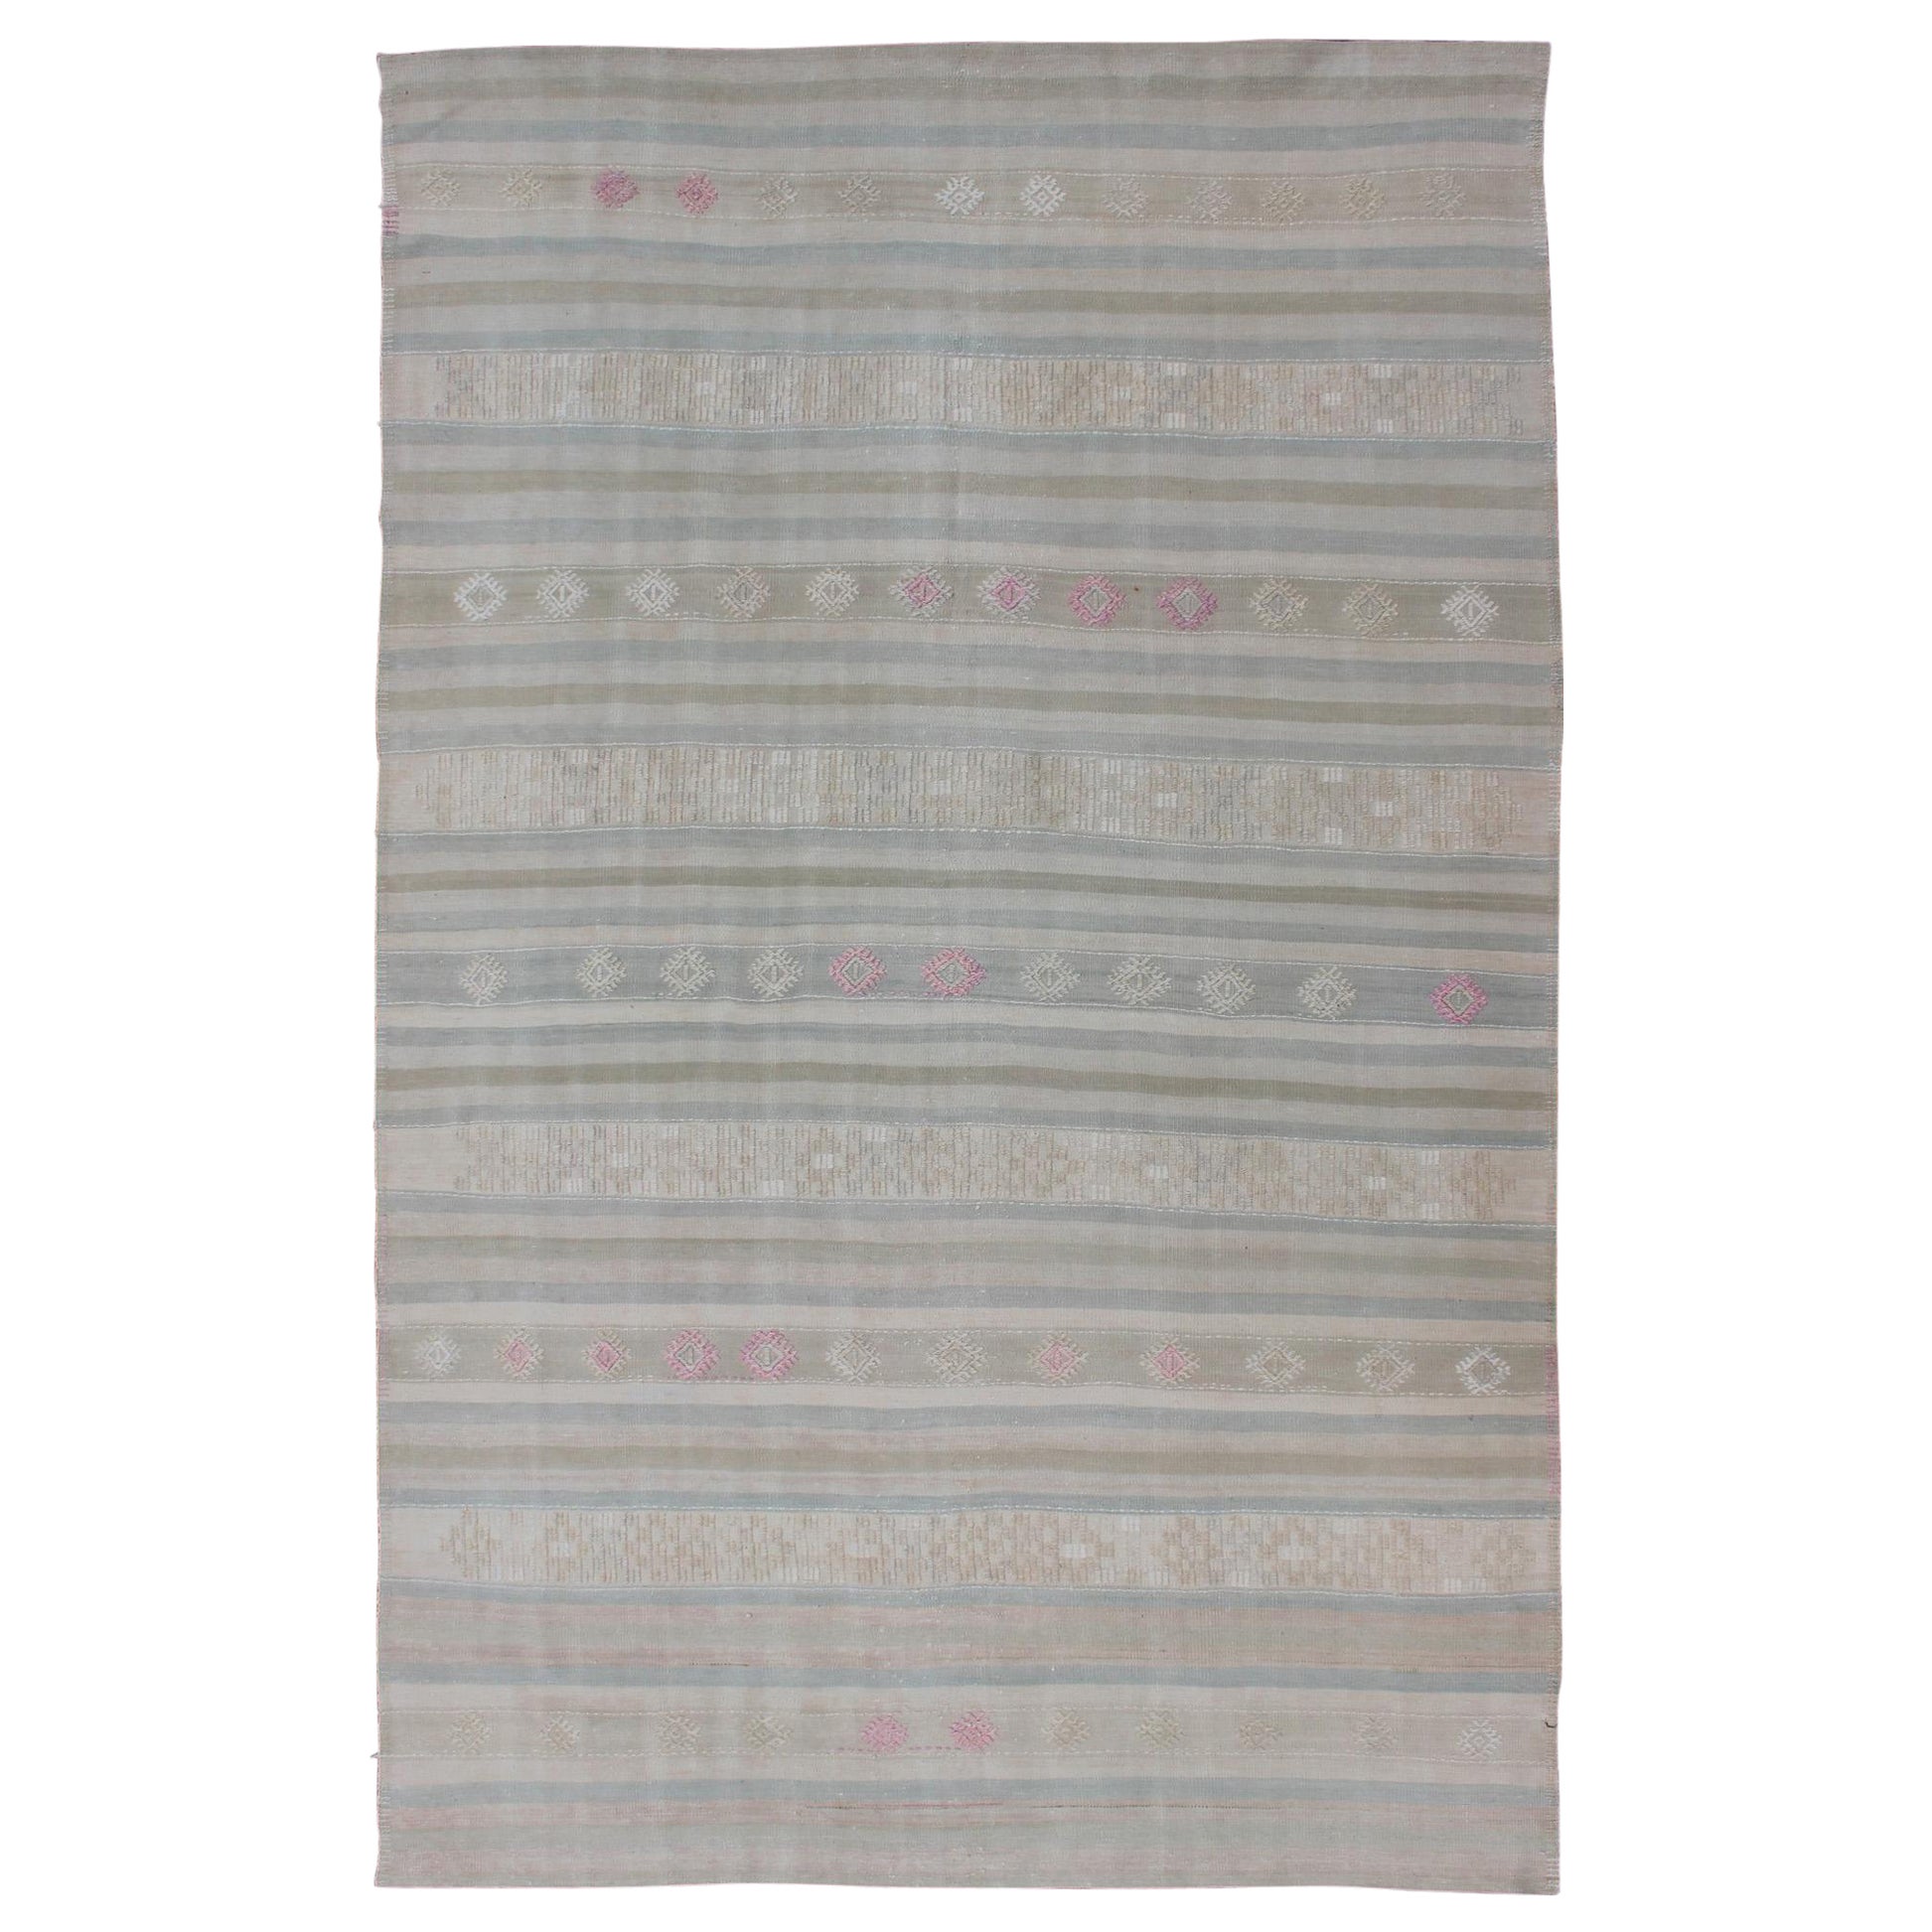 Flat-Weave Kilim with Embroideries in Taupe, Green, Blue and Gray